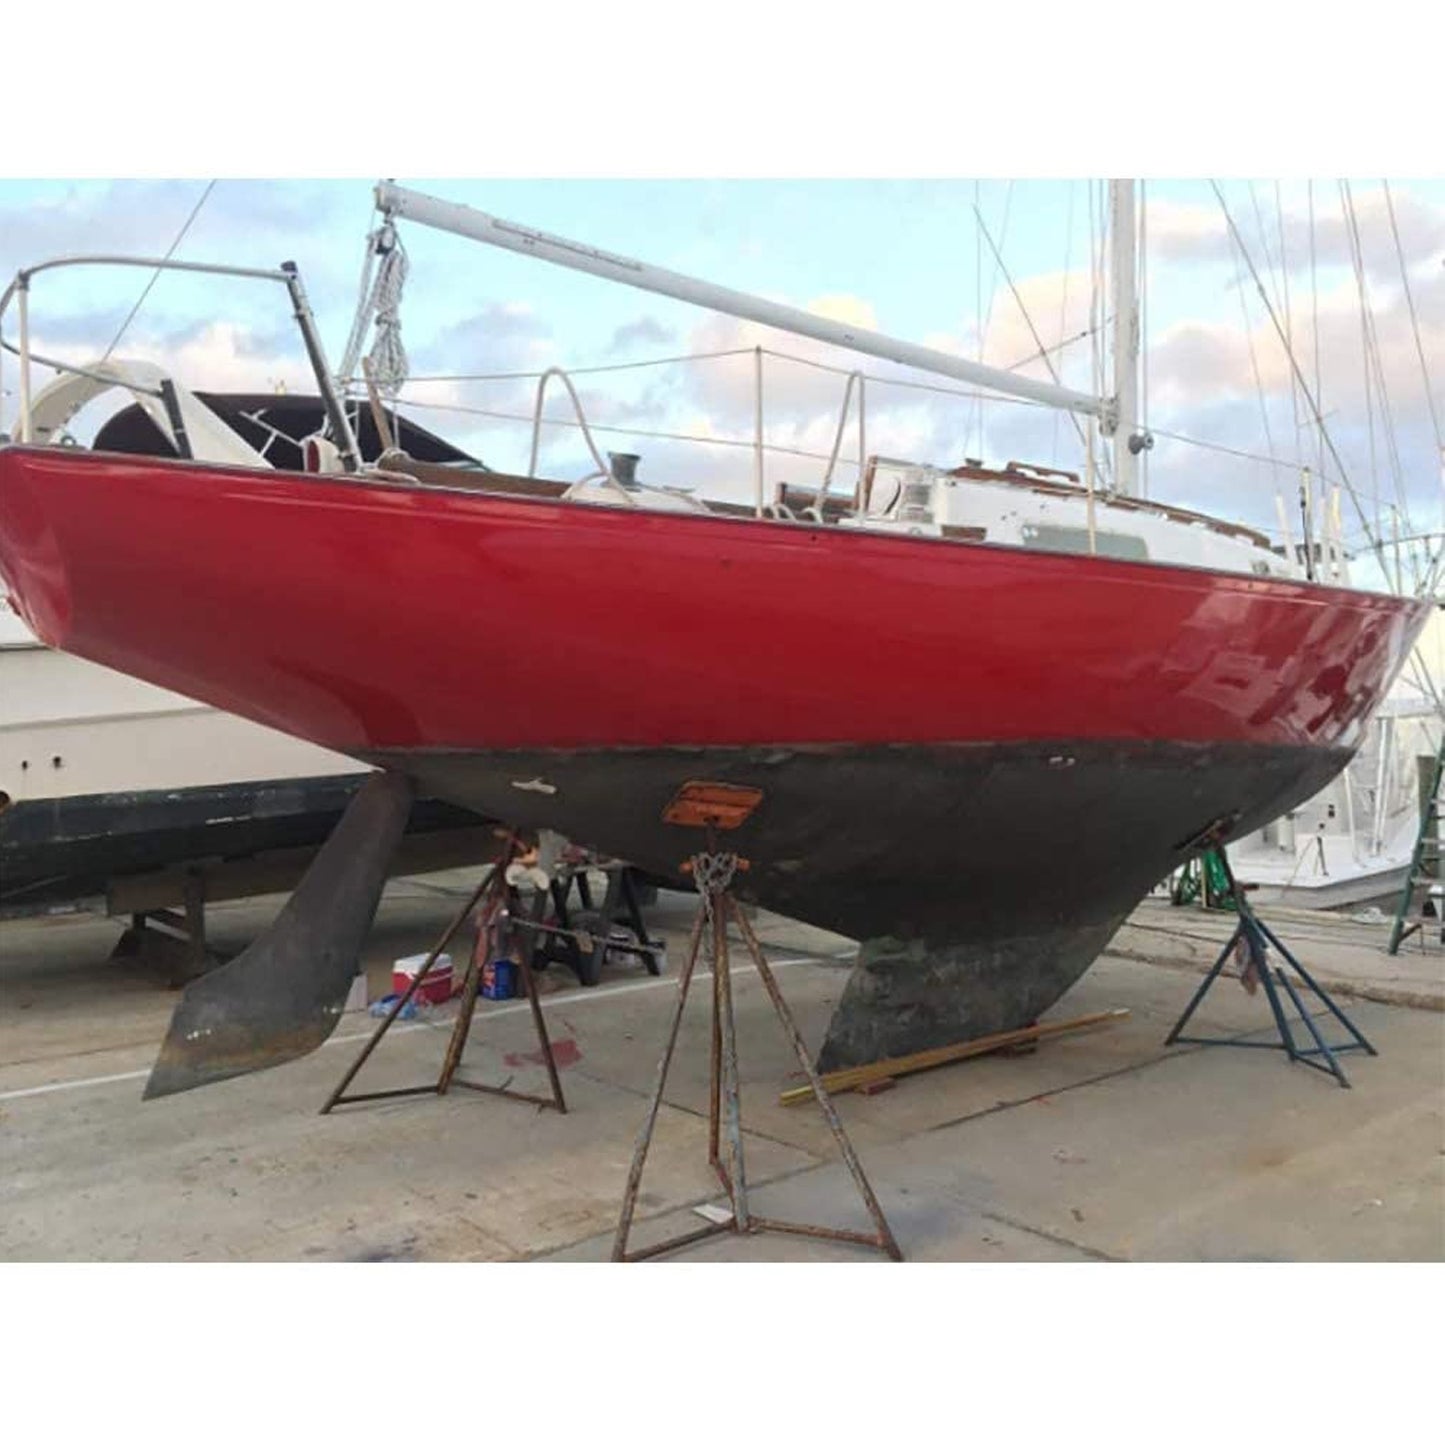 TotalBoat Wet Edge Topside Paint fire red on a finished boat